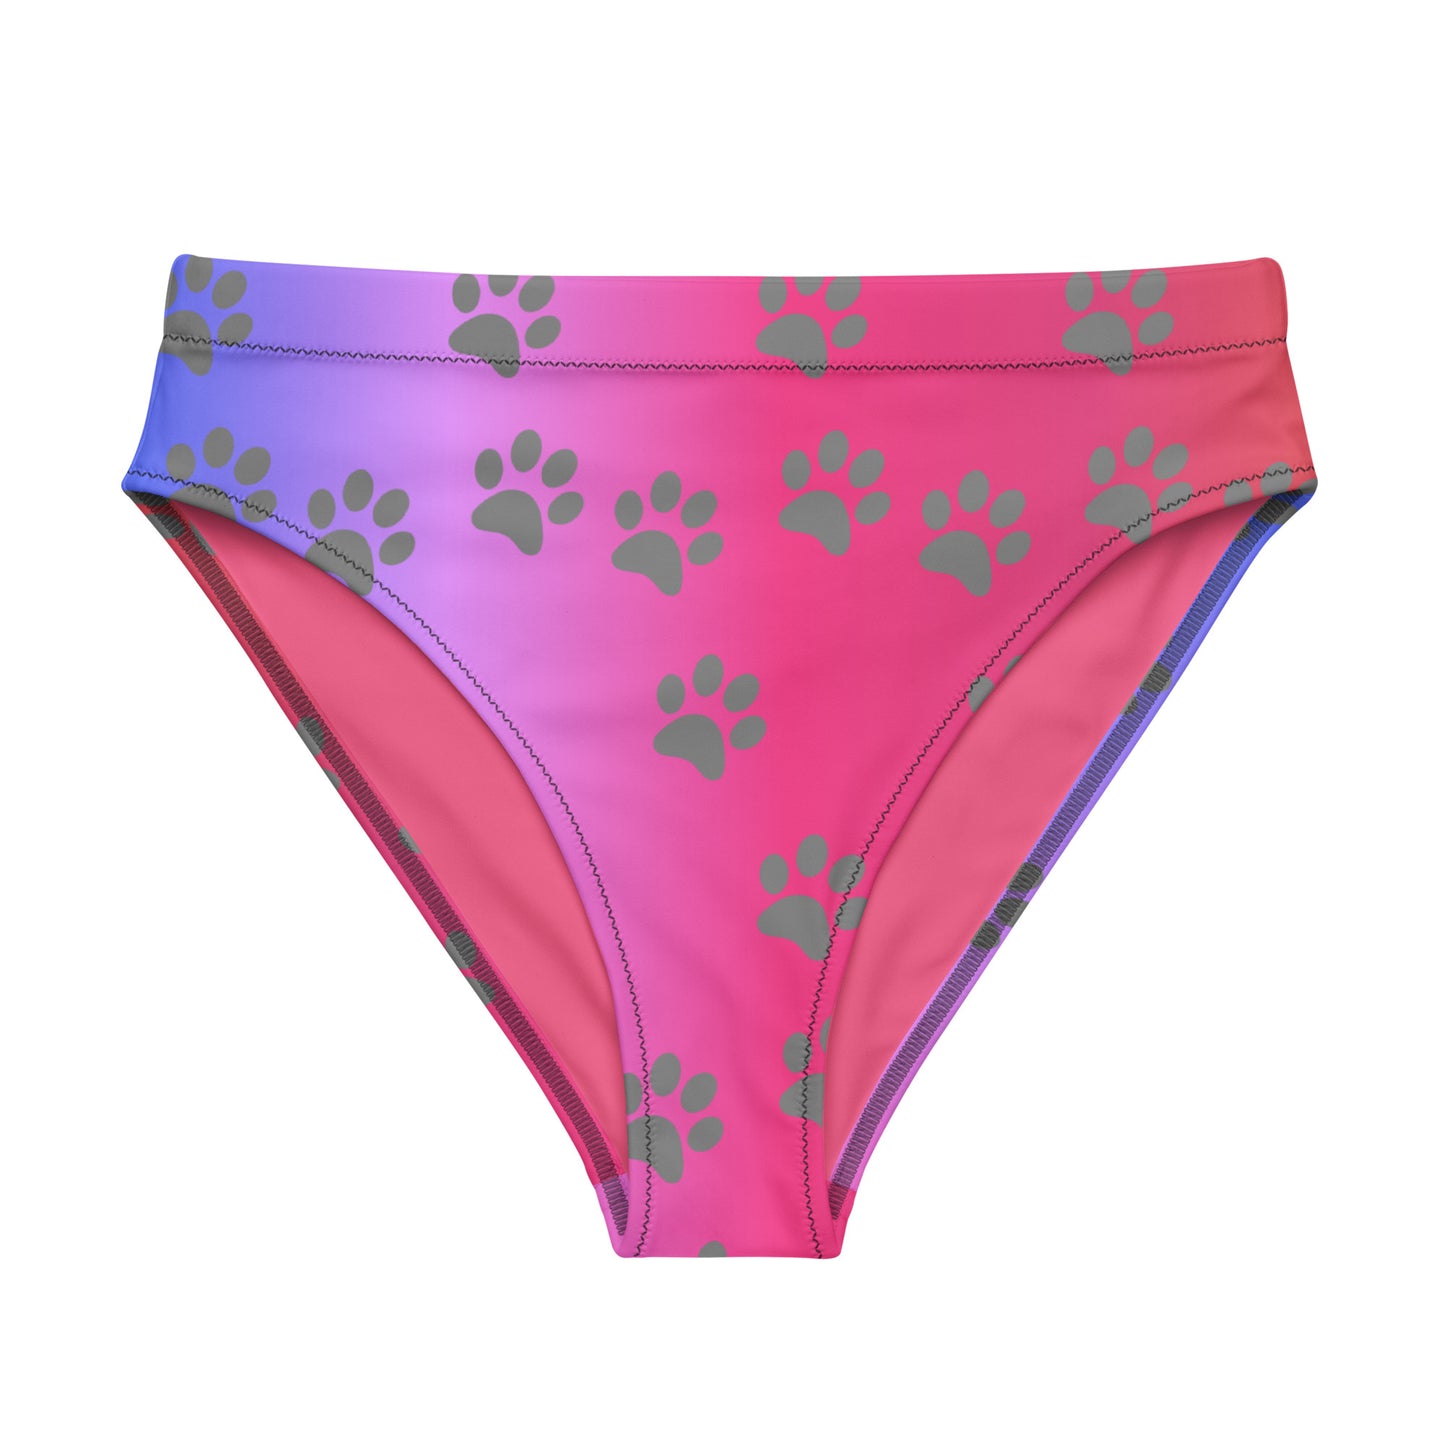 Special Edition - My Pet My Life High Waisted Bikini Bottoms